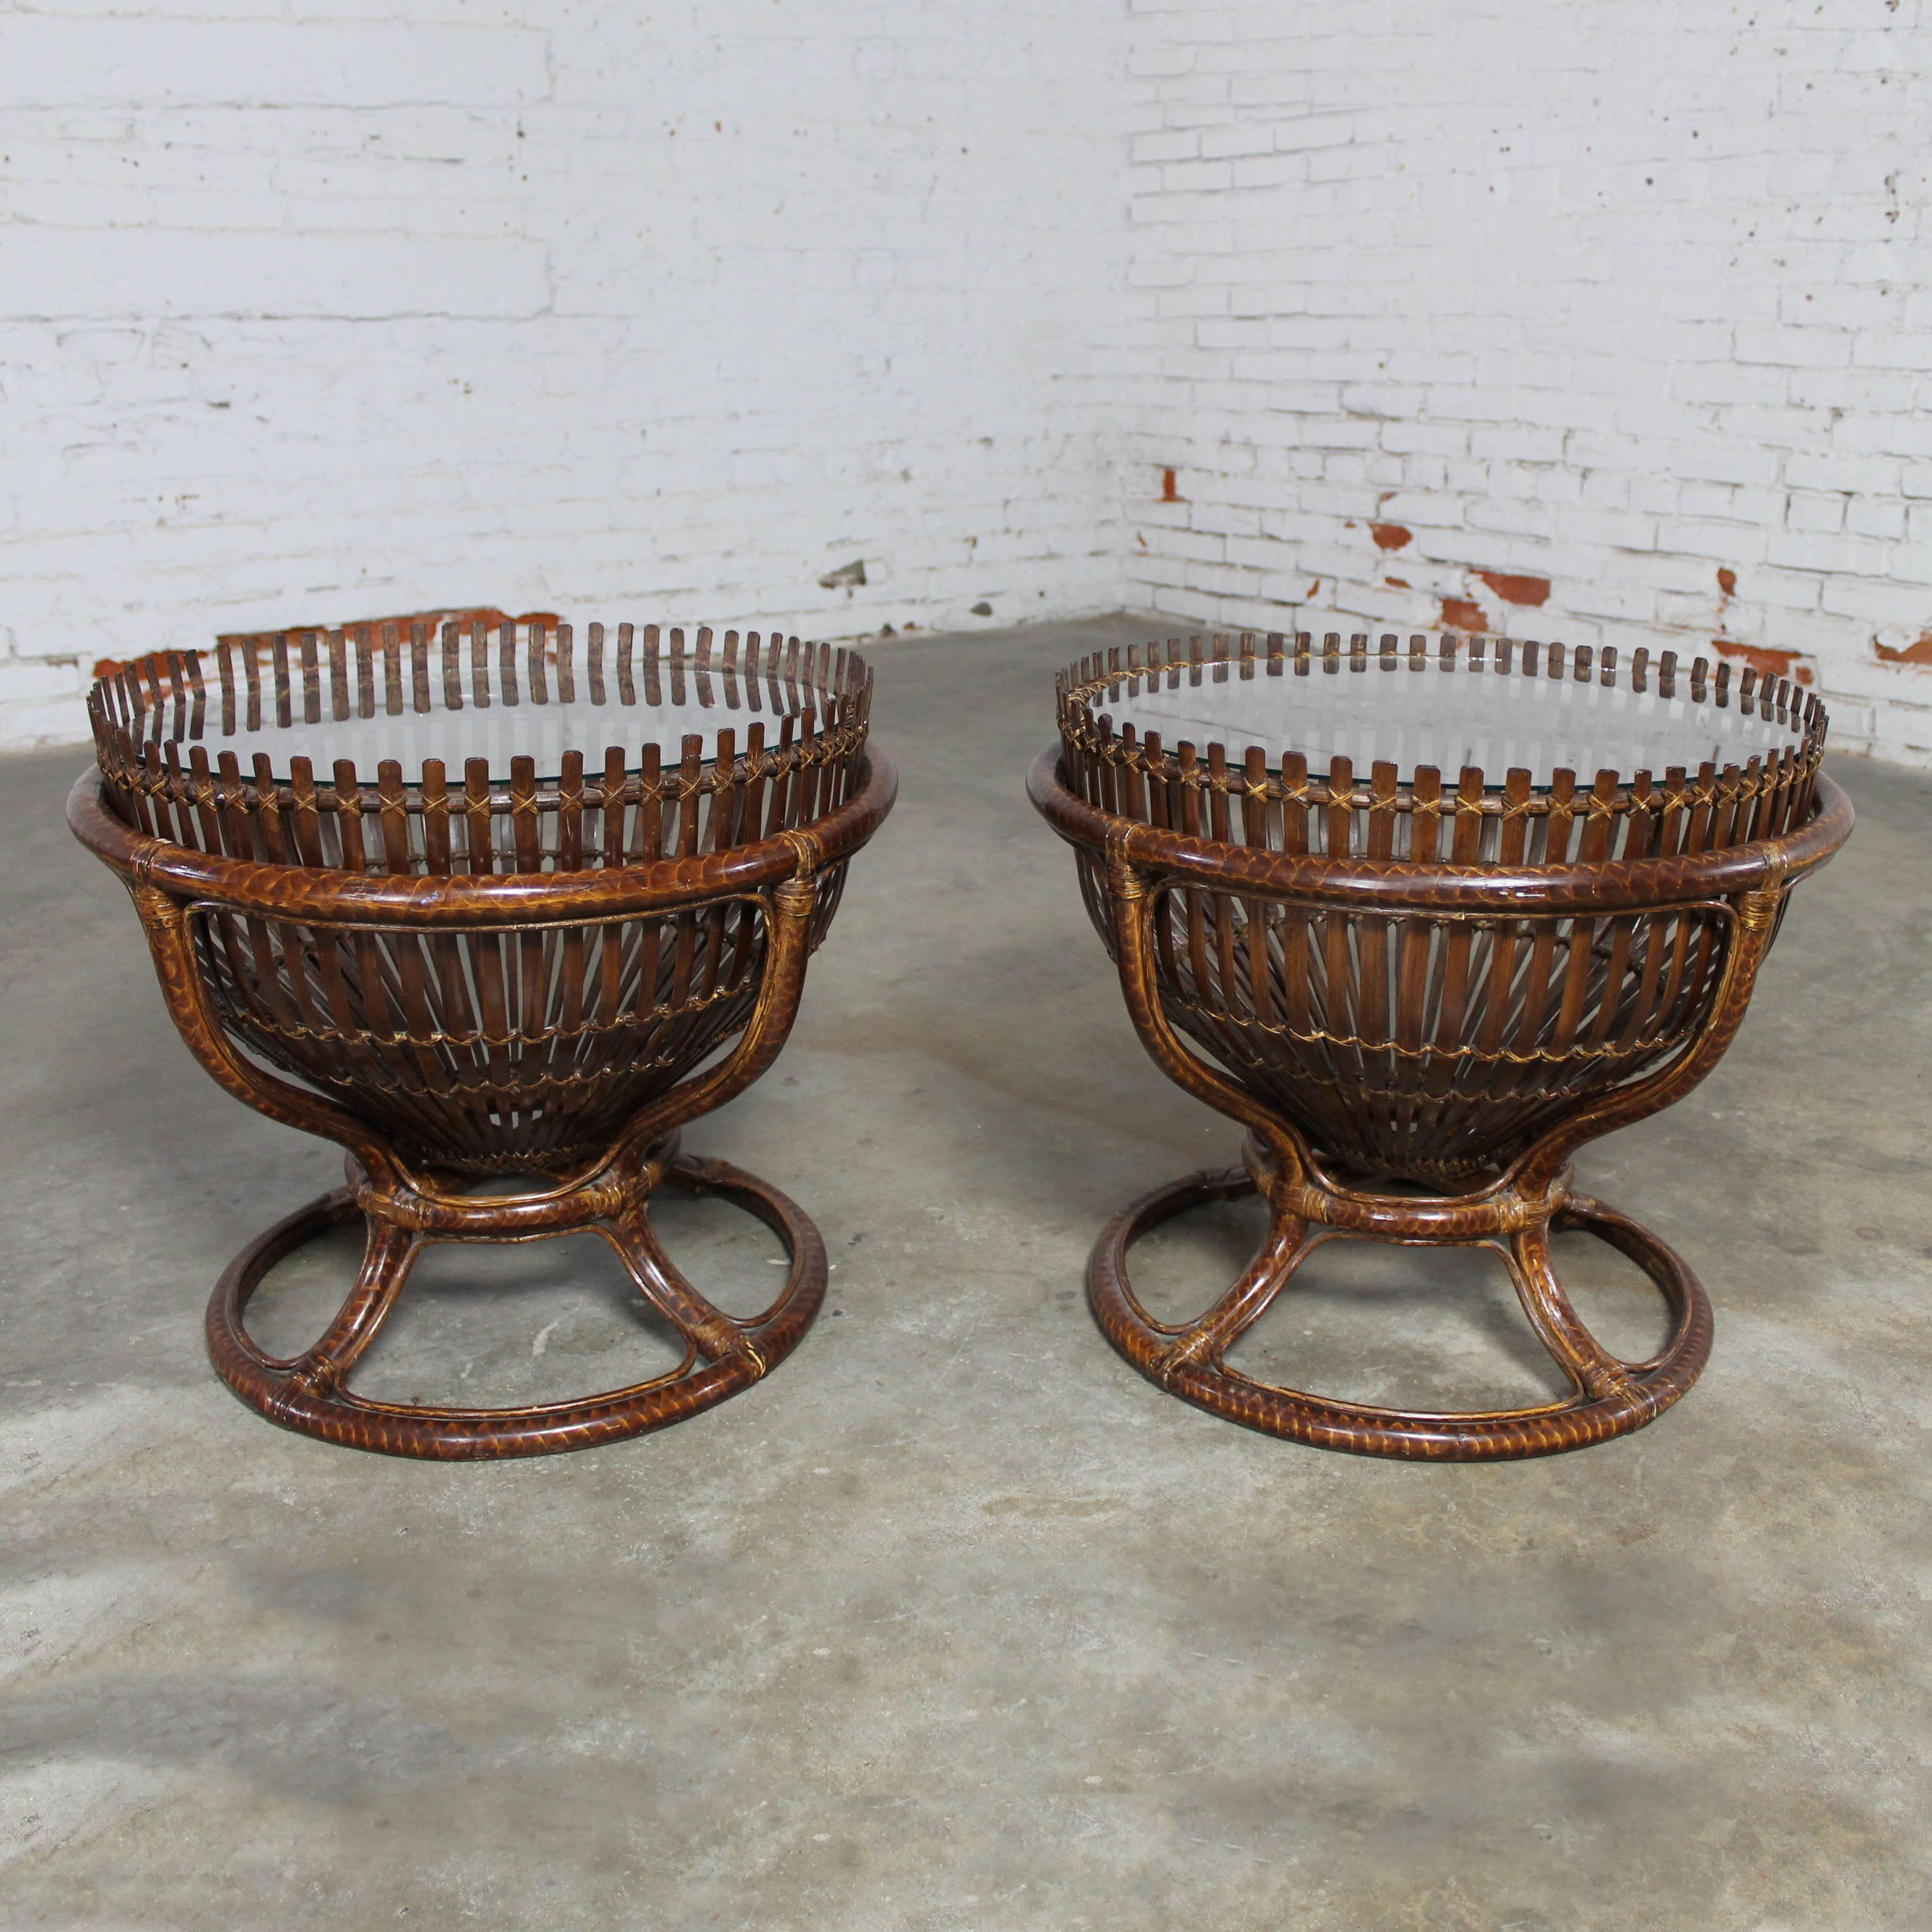 Fabulous pair of fish trap basket tables in rattan stands with glass tops. Made in the style of Franco Albini. This pair is in exceptionally good condition and have new 3/8-inch glass tops, circa 20th century.

Such a handsome pair of side tables!